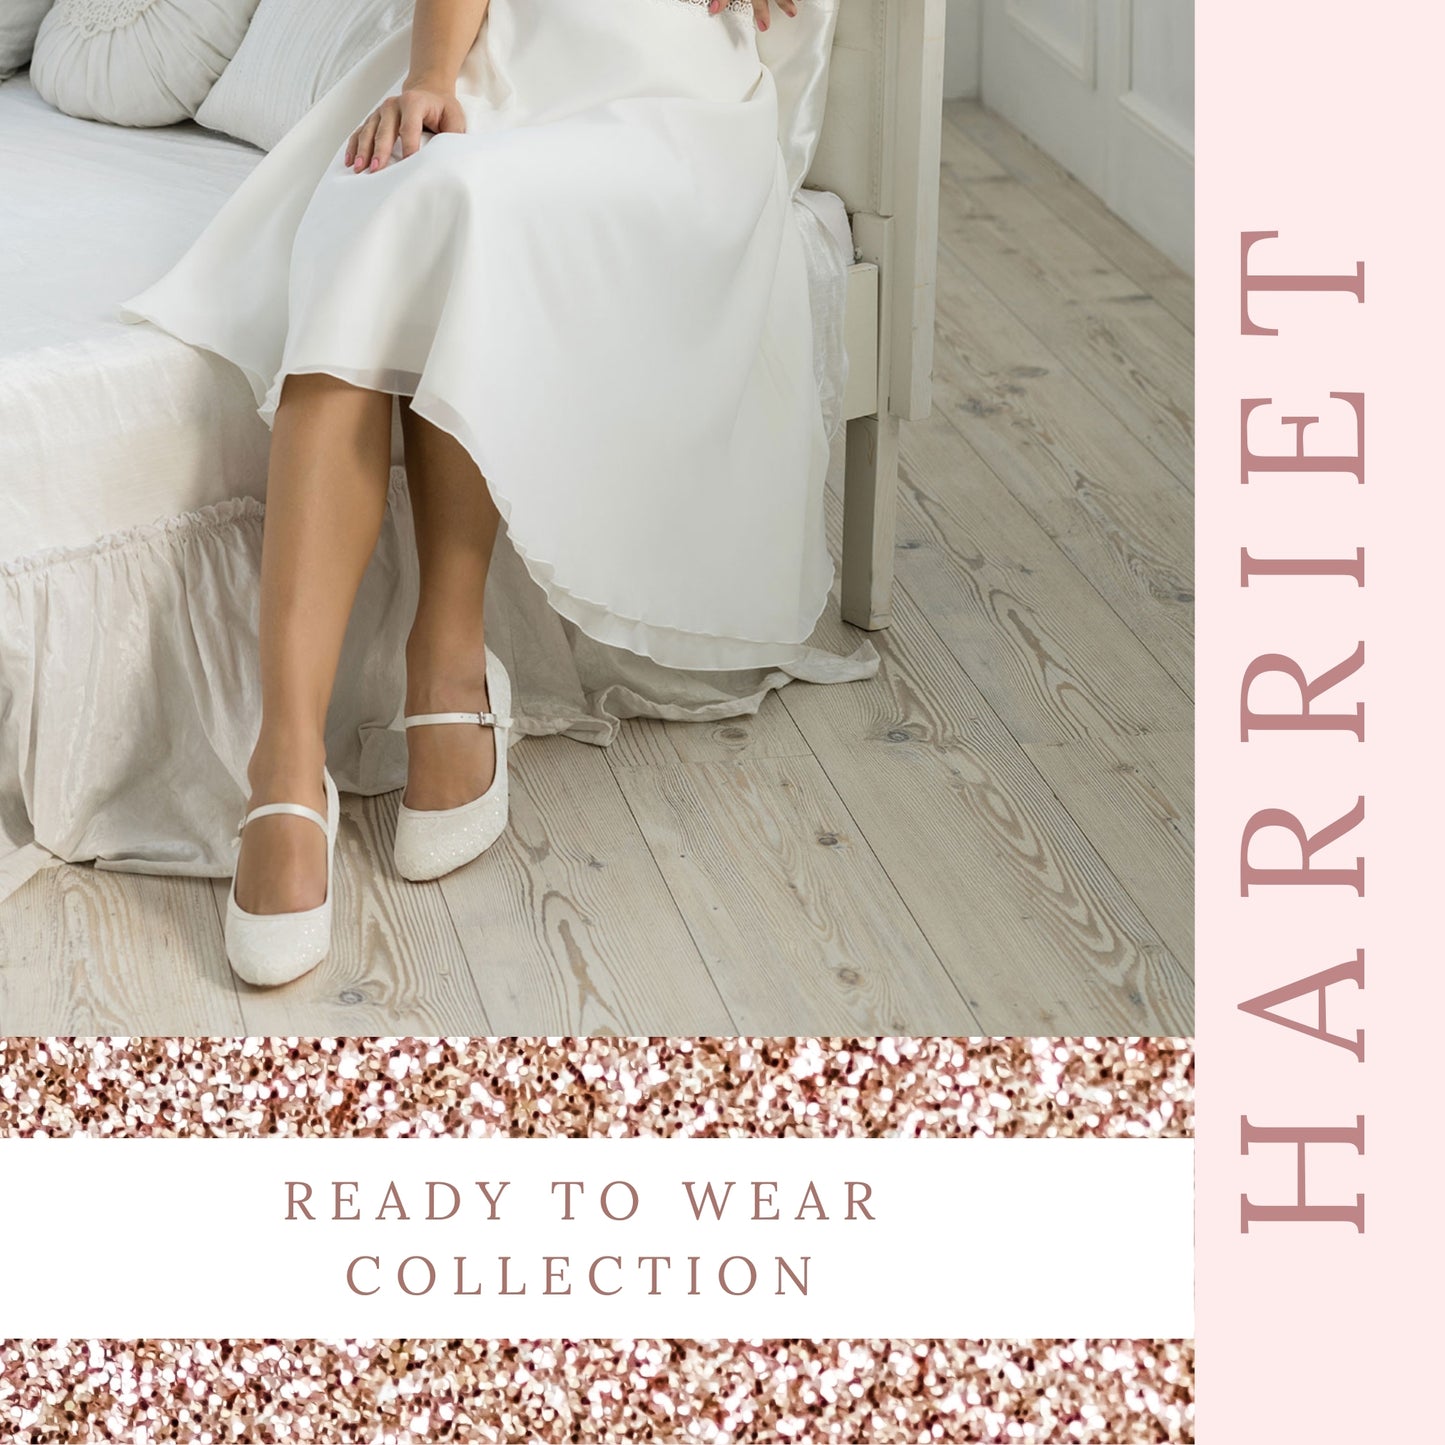 harriet-style-wedding-shoes